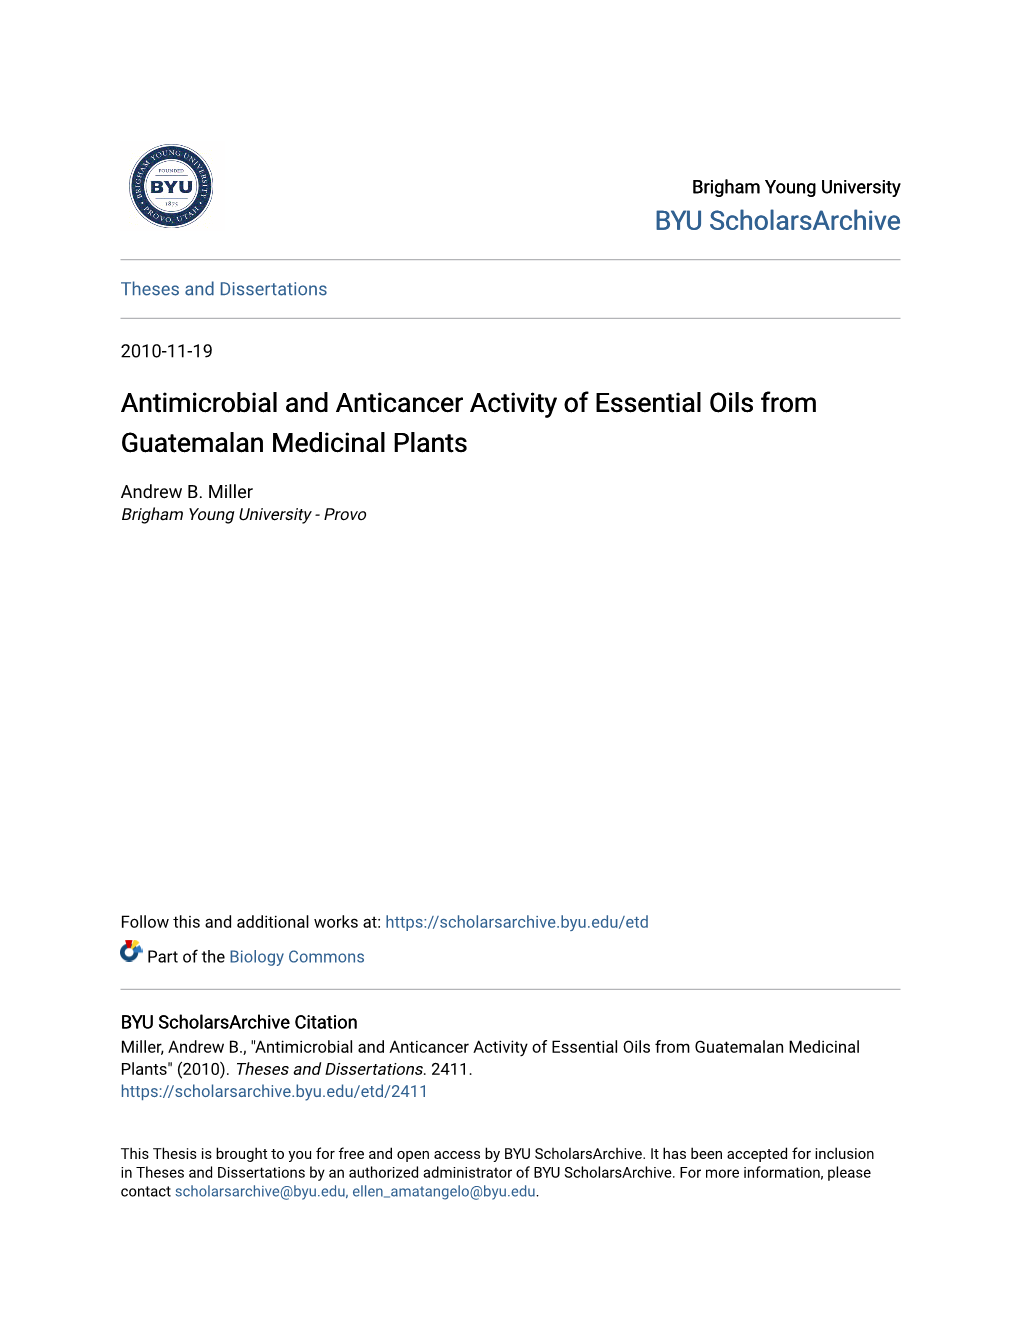 Antimicrobial and Anticancer Activity of Essential Oils from Guatemalan Medicinal Plants